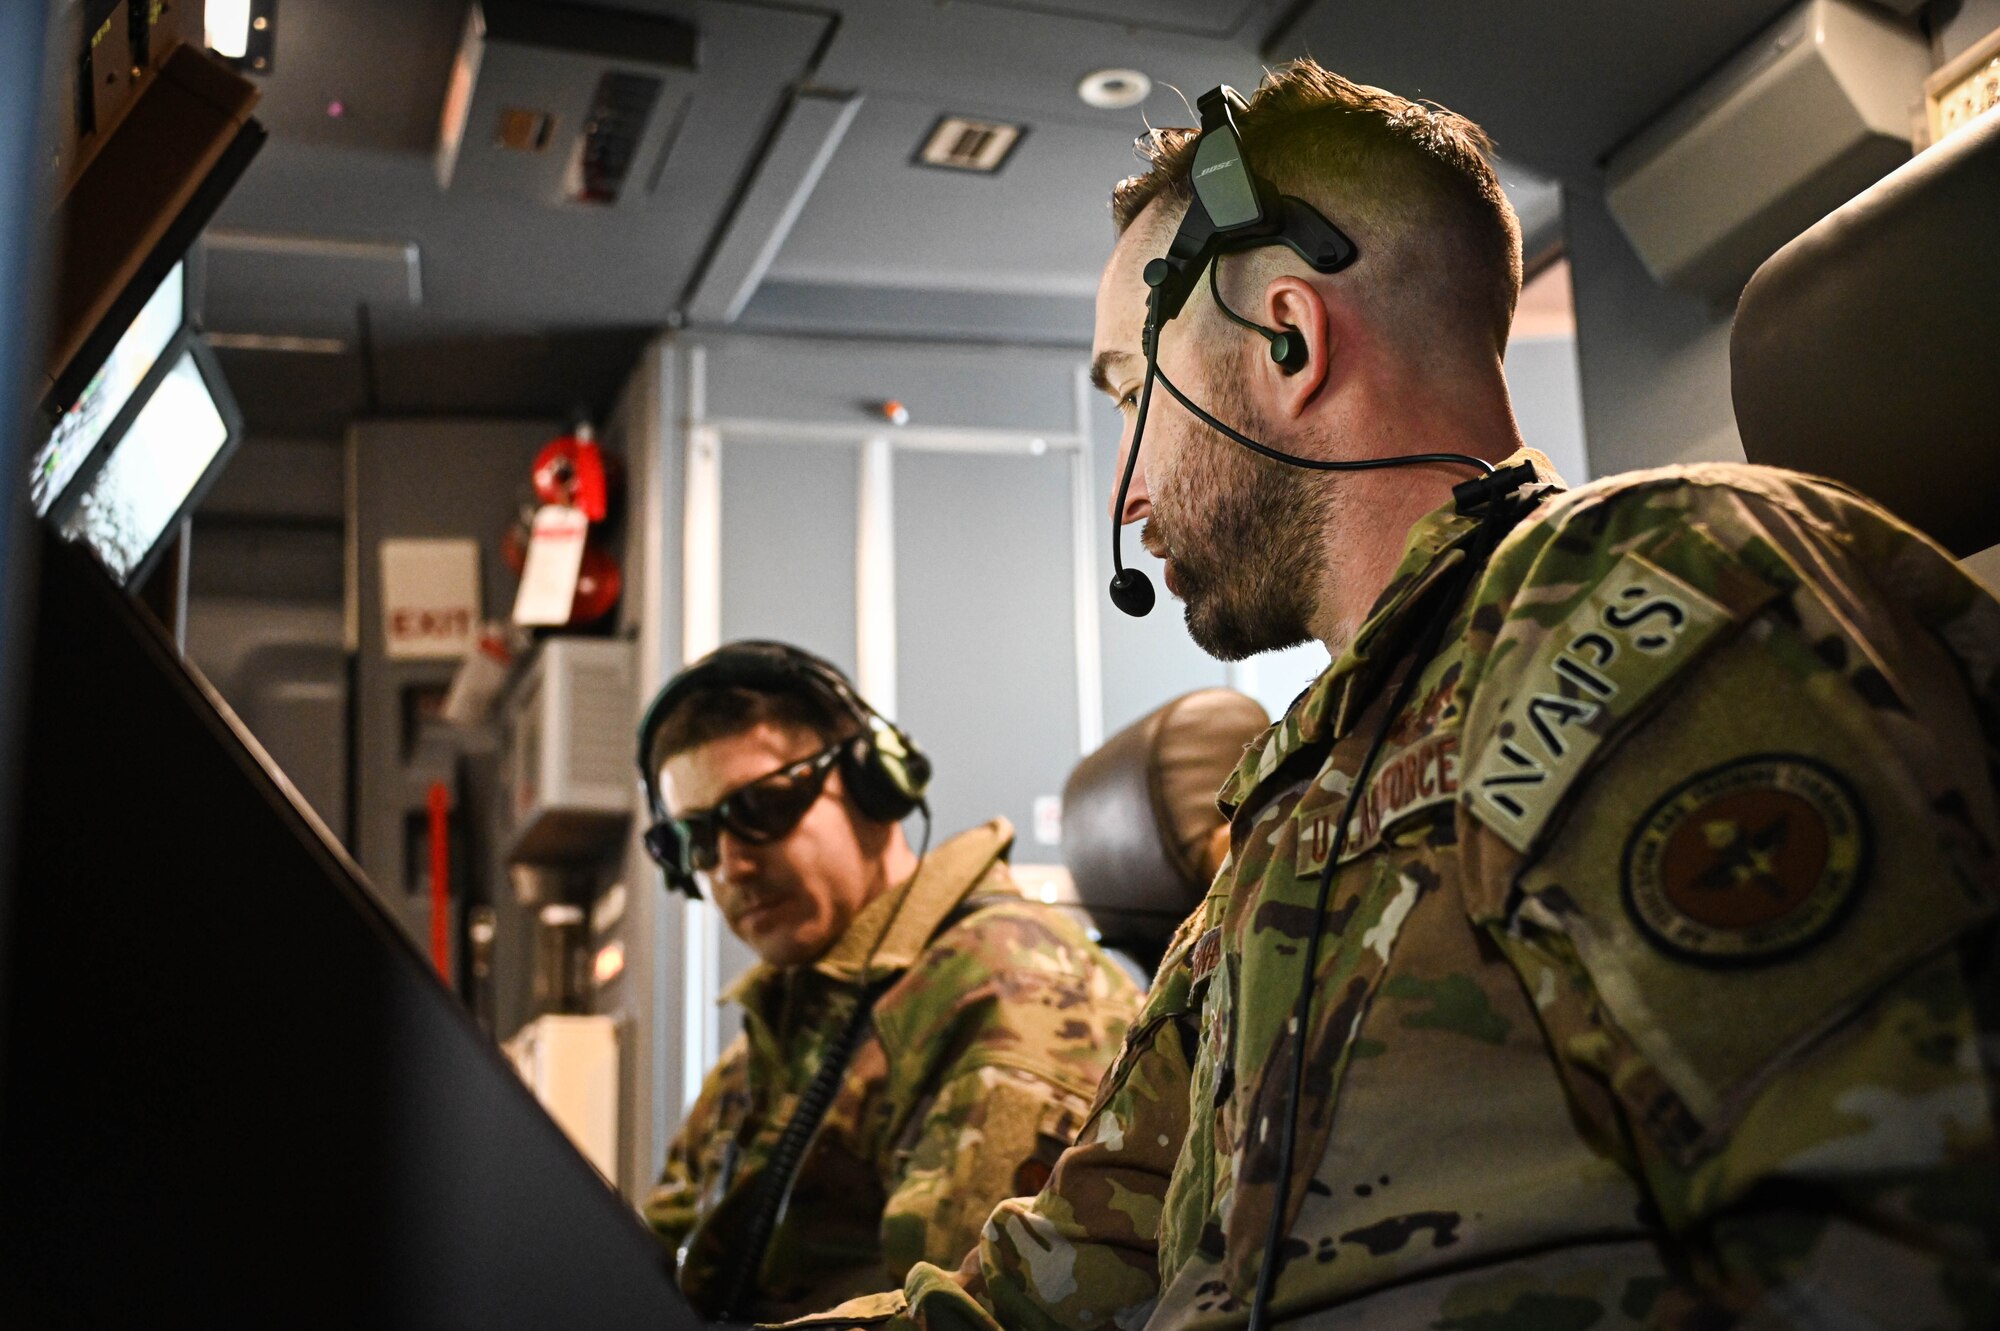 U.S. Air Force Tech. Sgt. Ian Sweaney (right), 56th Air Refueling Squadron evaluator boom operator, explains the boom operator station on a KC-46 Pegasus to Tech. Sgt. Joshua, 432nd Air Expeditionary Wing evaluator sensor operator, March 10, 2022. Seven sensor operators visited Altus Air Force Base, Oklahoma, to learn more about boom operators and the KC-46. (U.S. Air Force photo by Senior Airman Kayla Christenson)